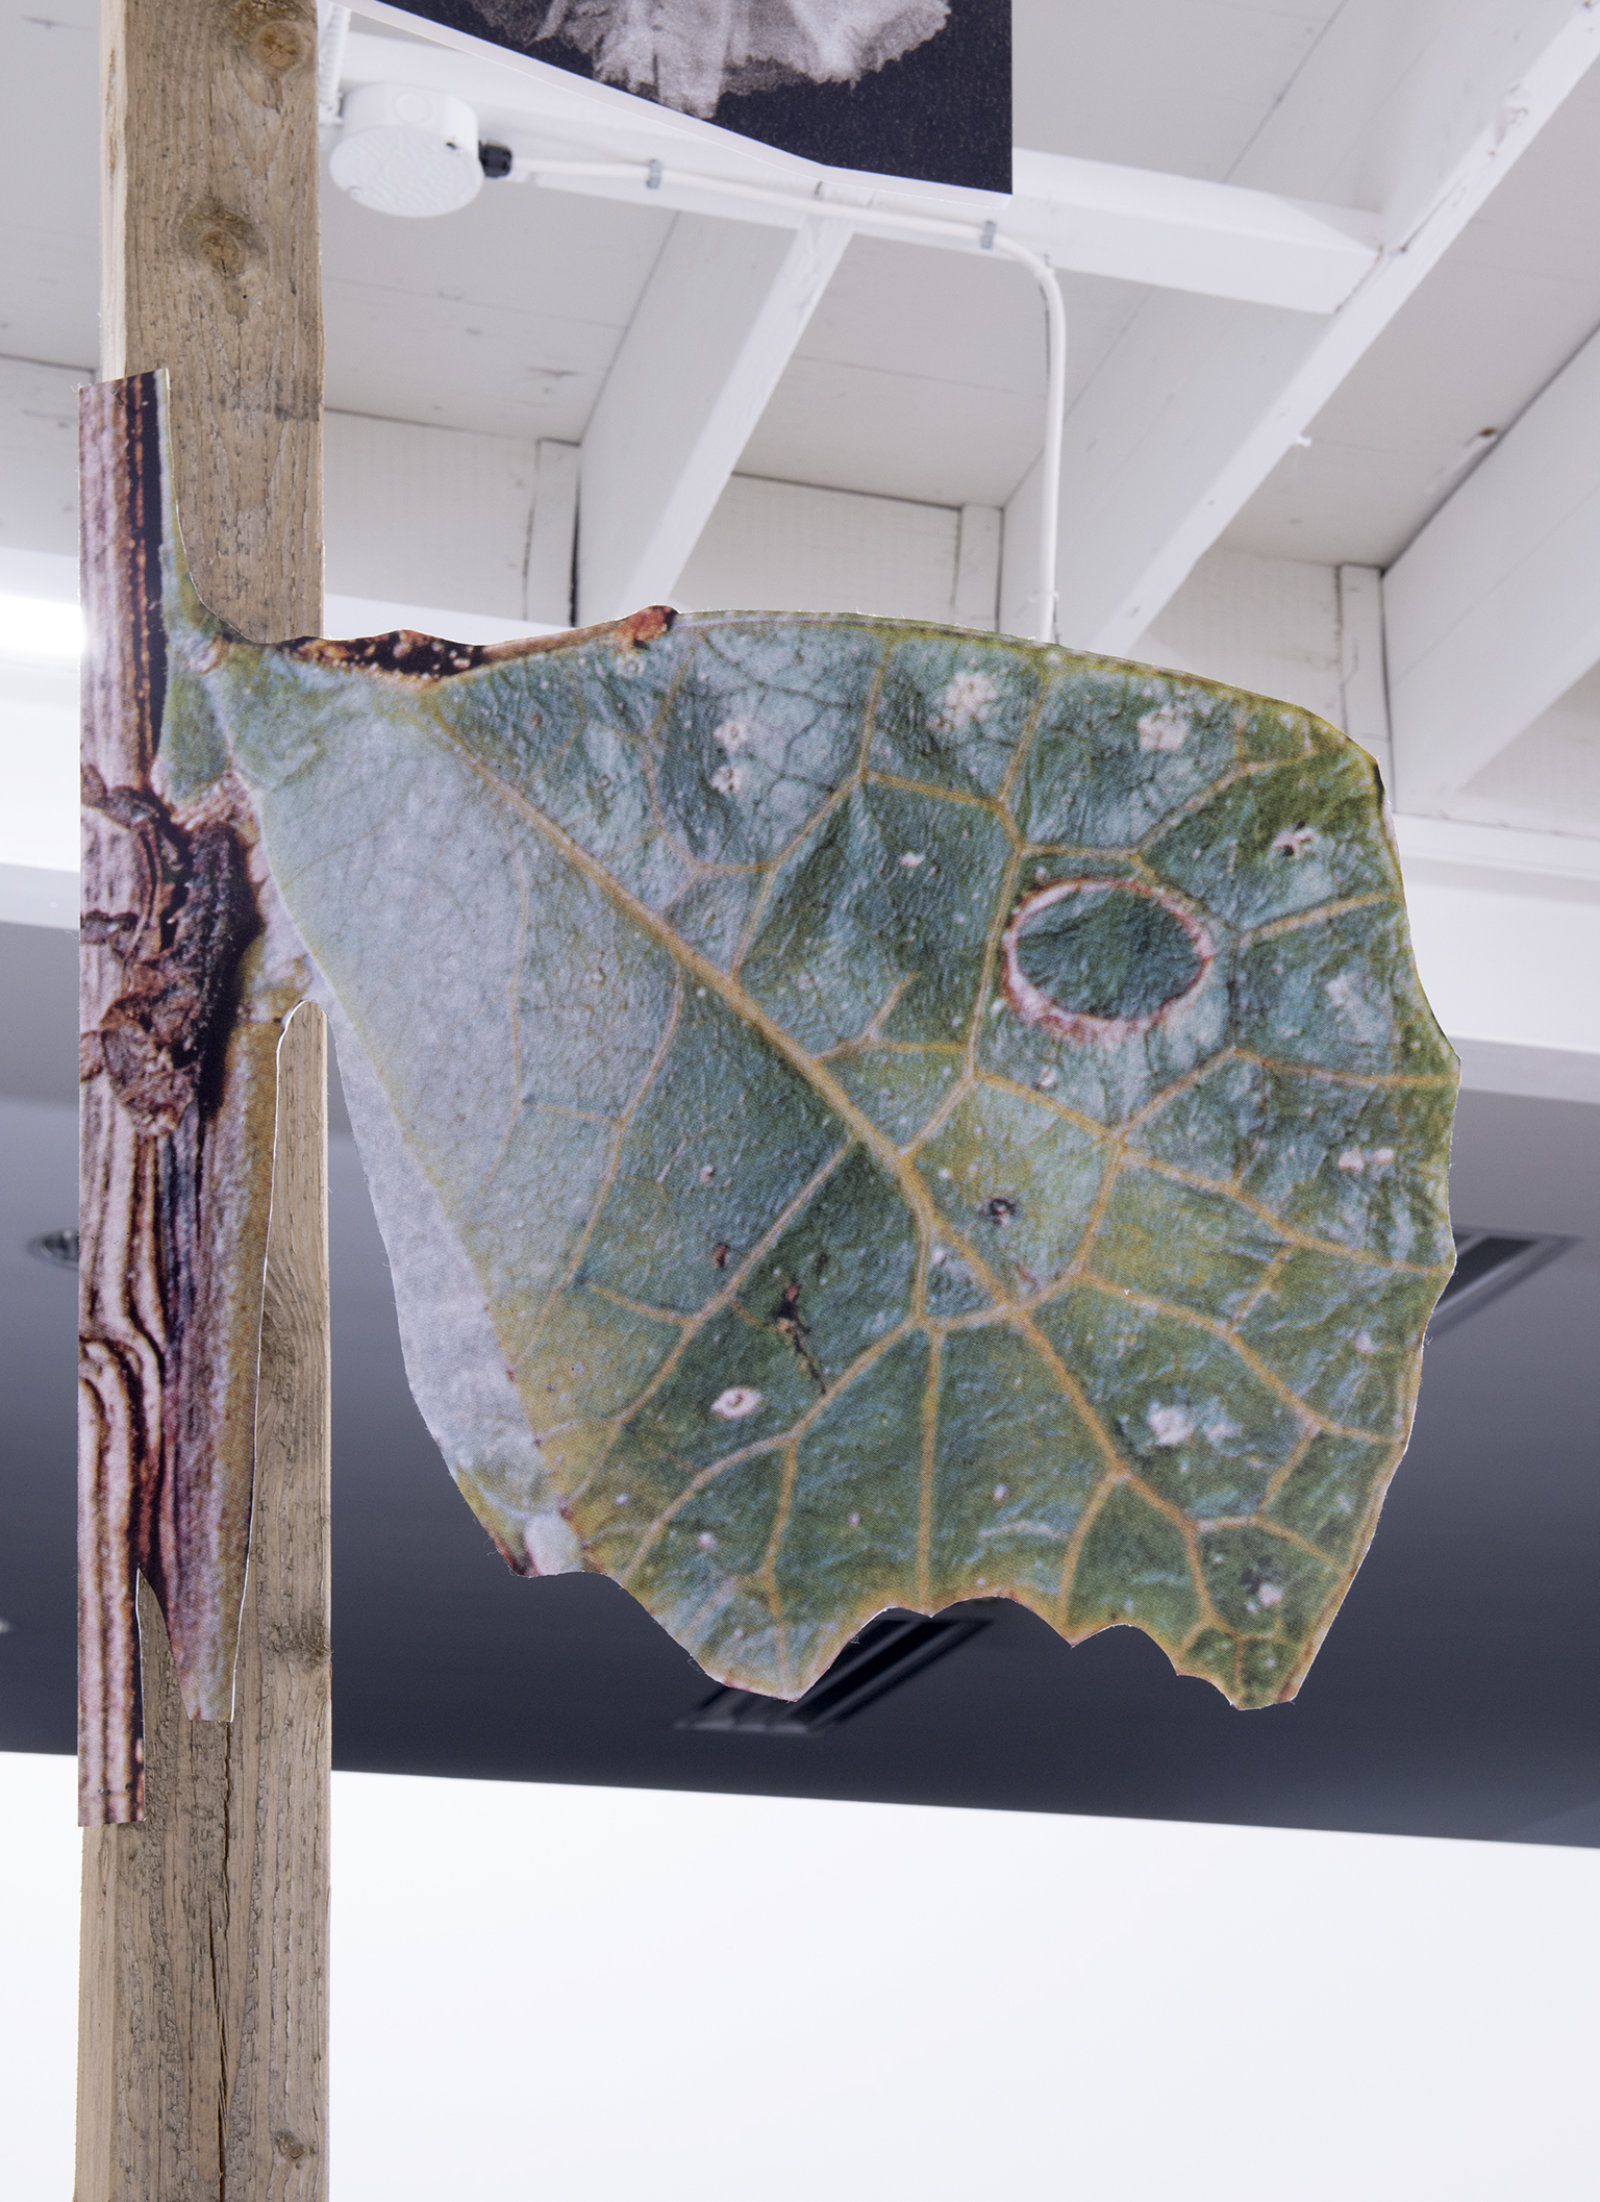 Geoffrey Farmer, In the dark pool the grass grows. In the grass there is night. Hold tight, and climb the tree, eating leaves then leap! (detail), 2014, douglas fir pole, 6 photographs mounted on foamcore, 200 x 4 x 4 in. (508 x 9 x 9 cm)